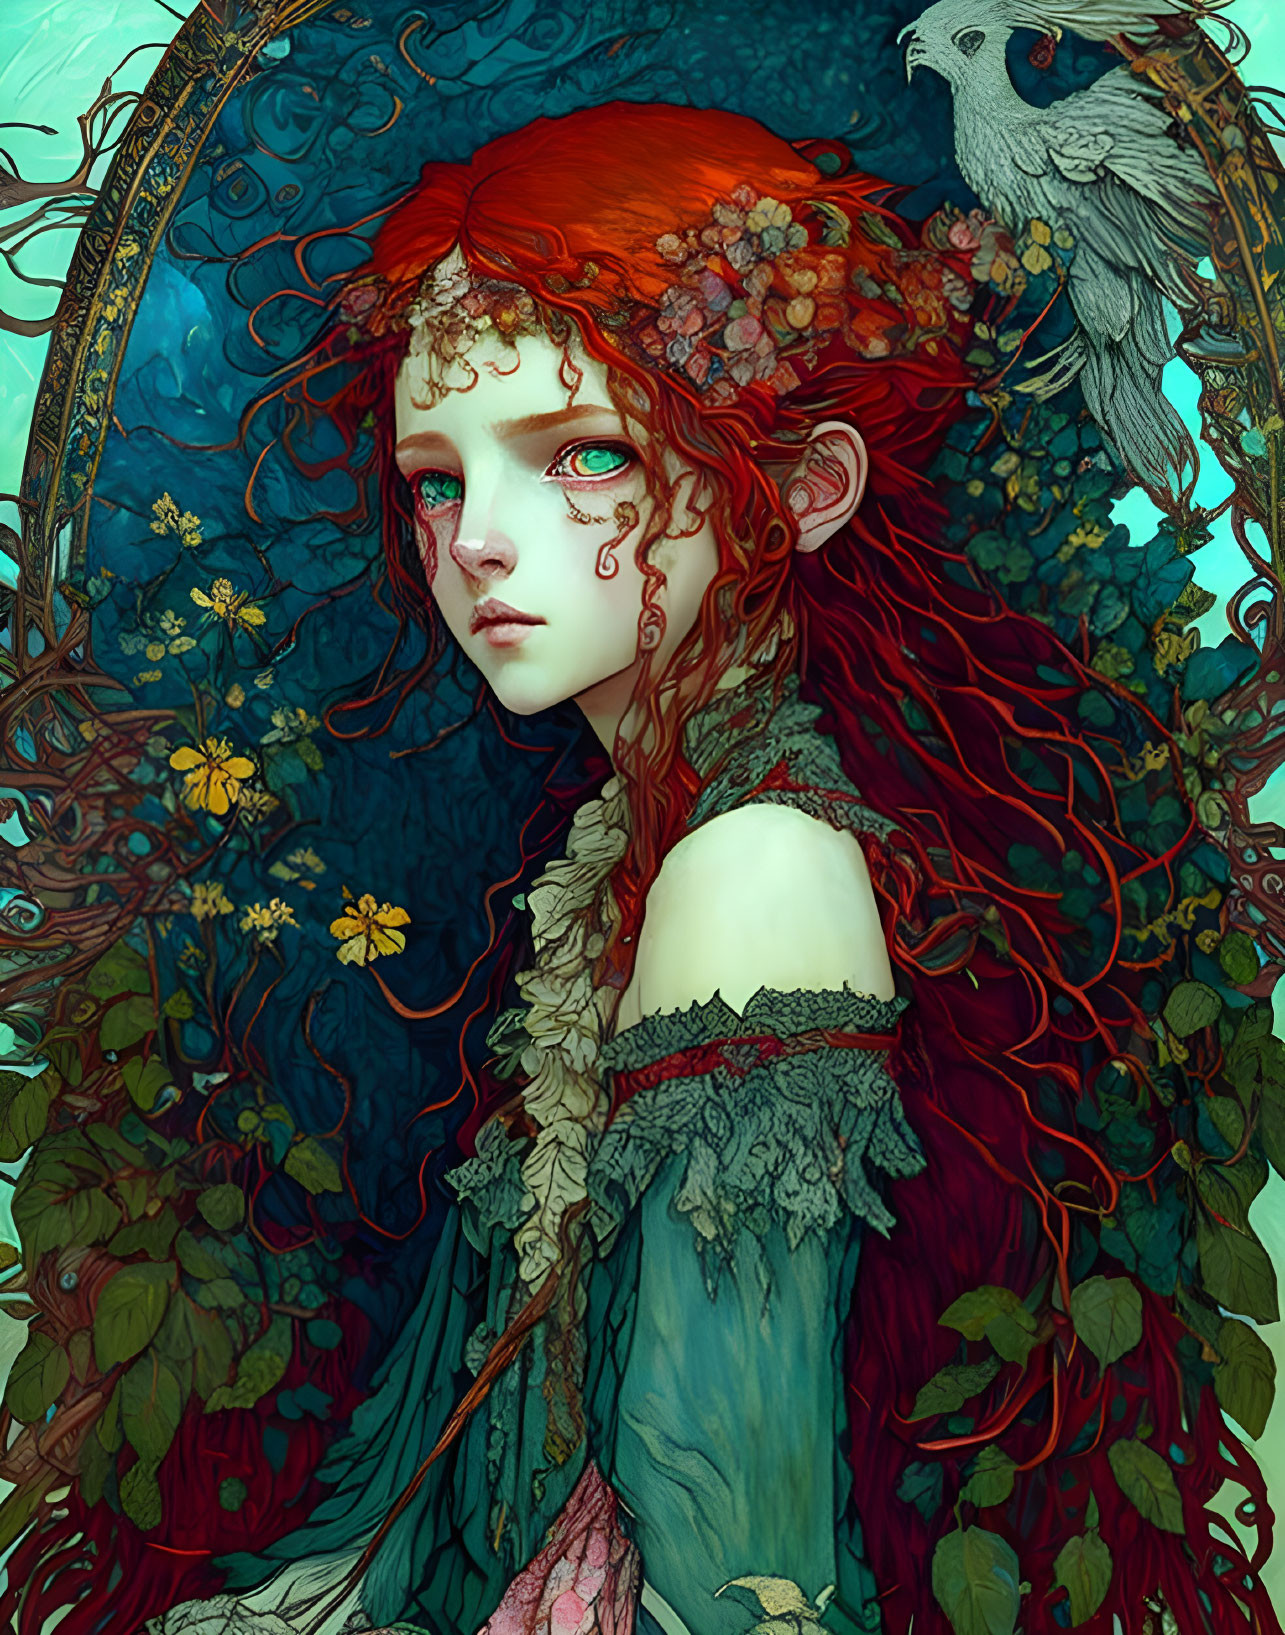 Illustration of red-haired girl with floral accessories in lush greenery